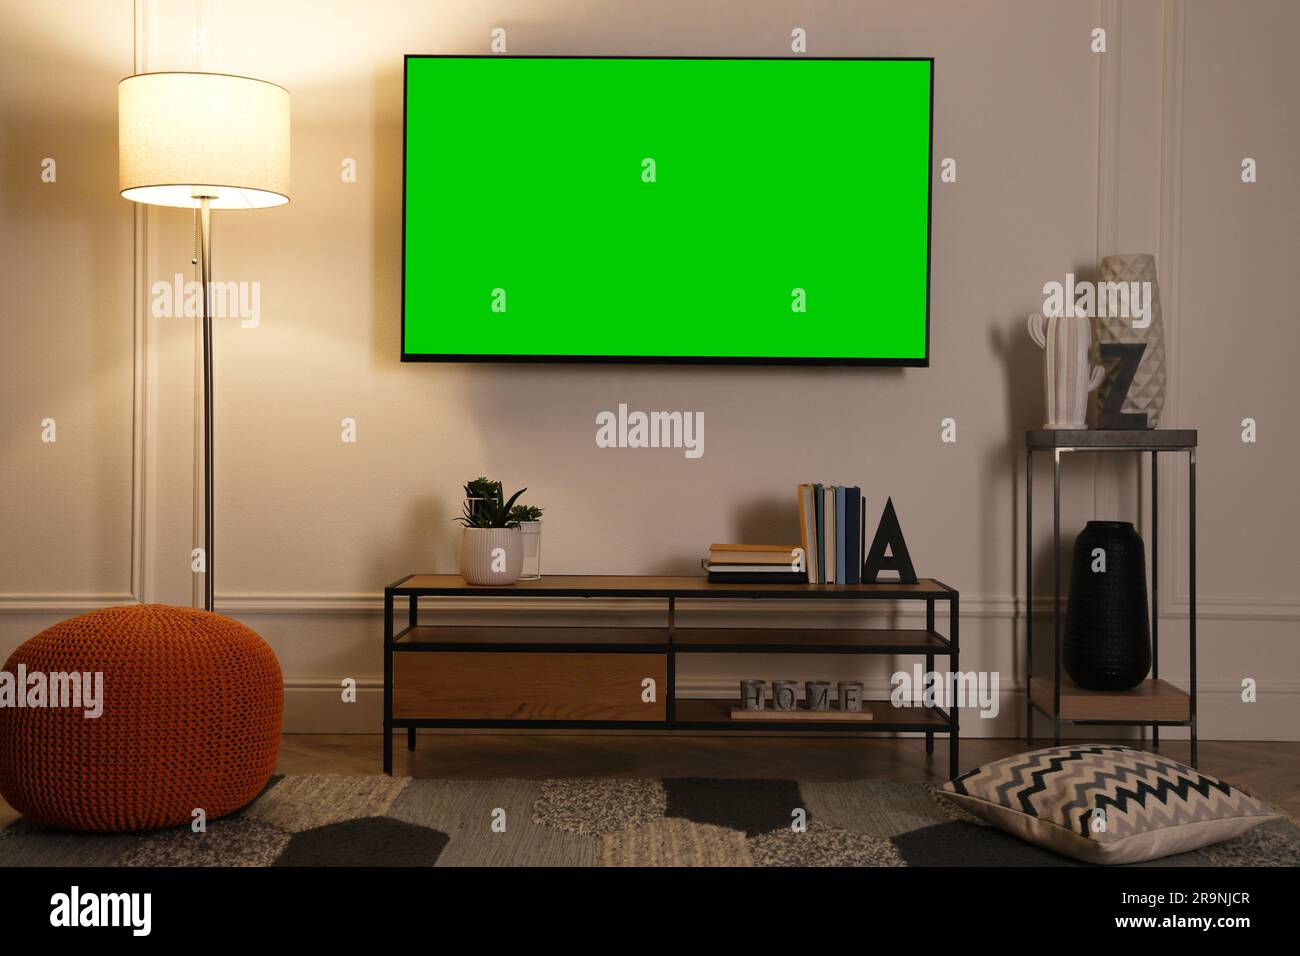 Chroma key compositing. TV with mockup green screen in room. Mockup for design Stock Photo